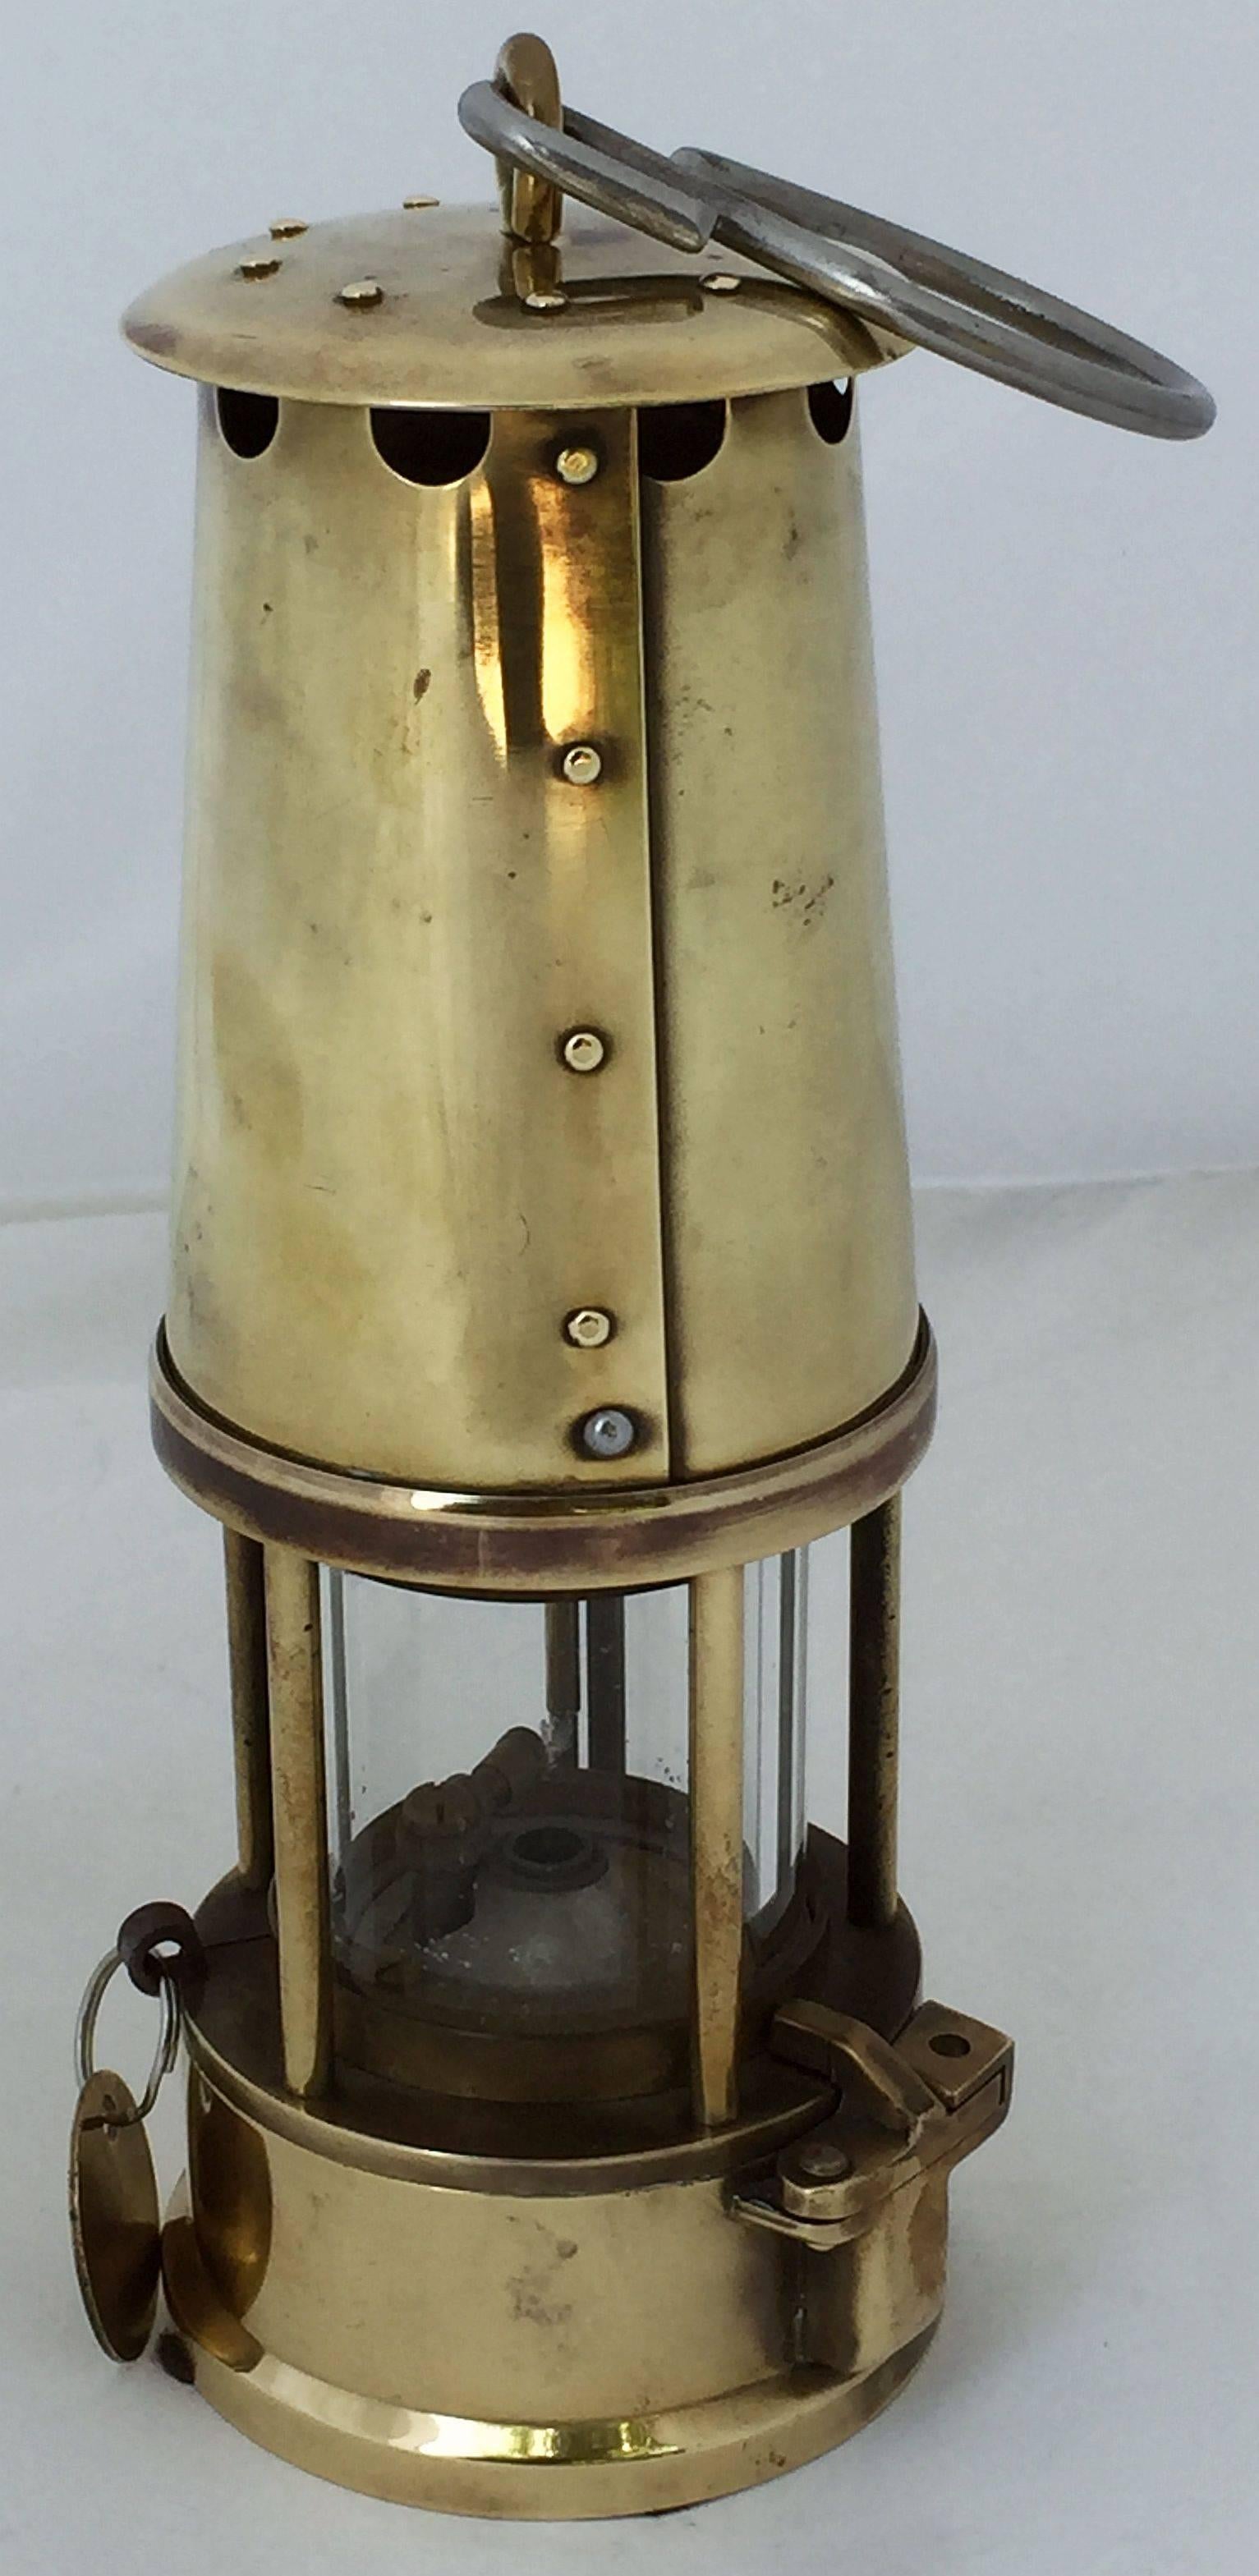 An English miner's lamp or safety lantern of brass in working order.
With maker's label and key with tag: 

The Protector Lamp & Lighting Co. Ltd. - Type 6, M & Q, Safety Lamps, Approval No. B/28, Makers, Eccles (Manchester).